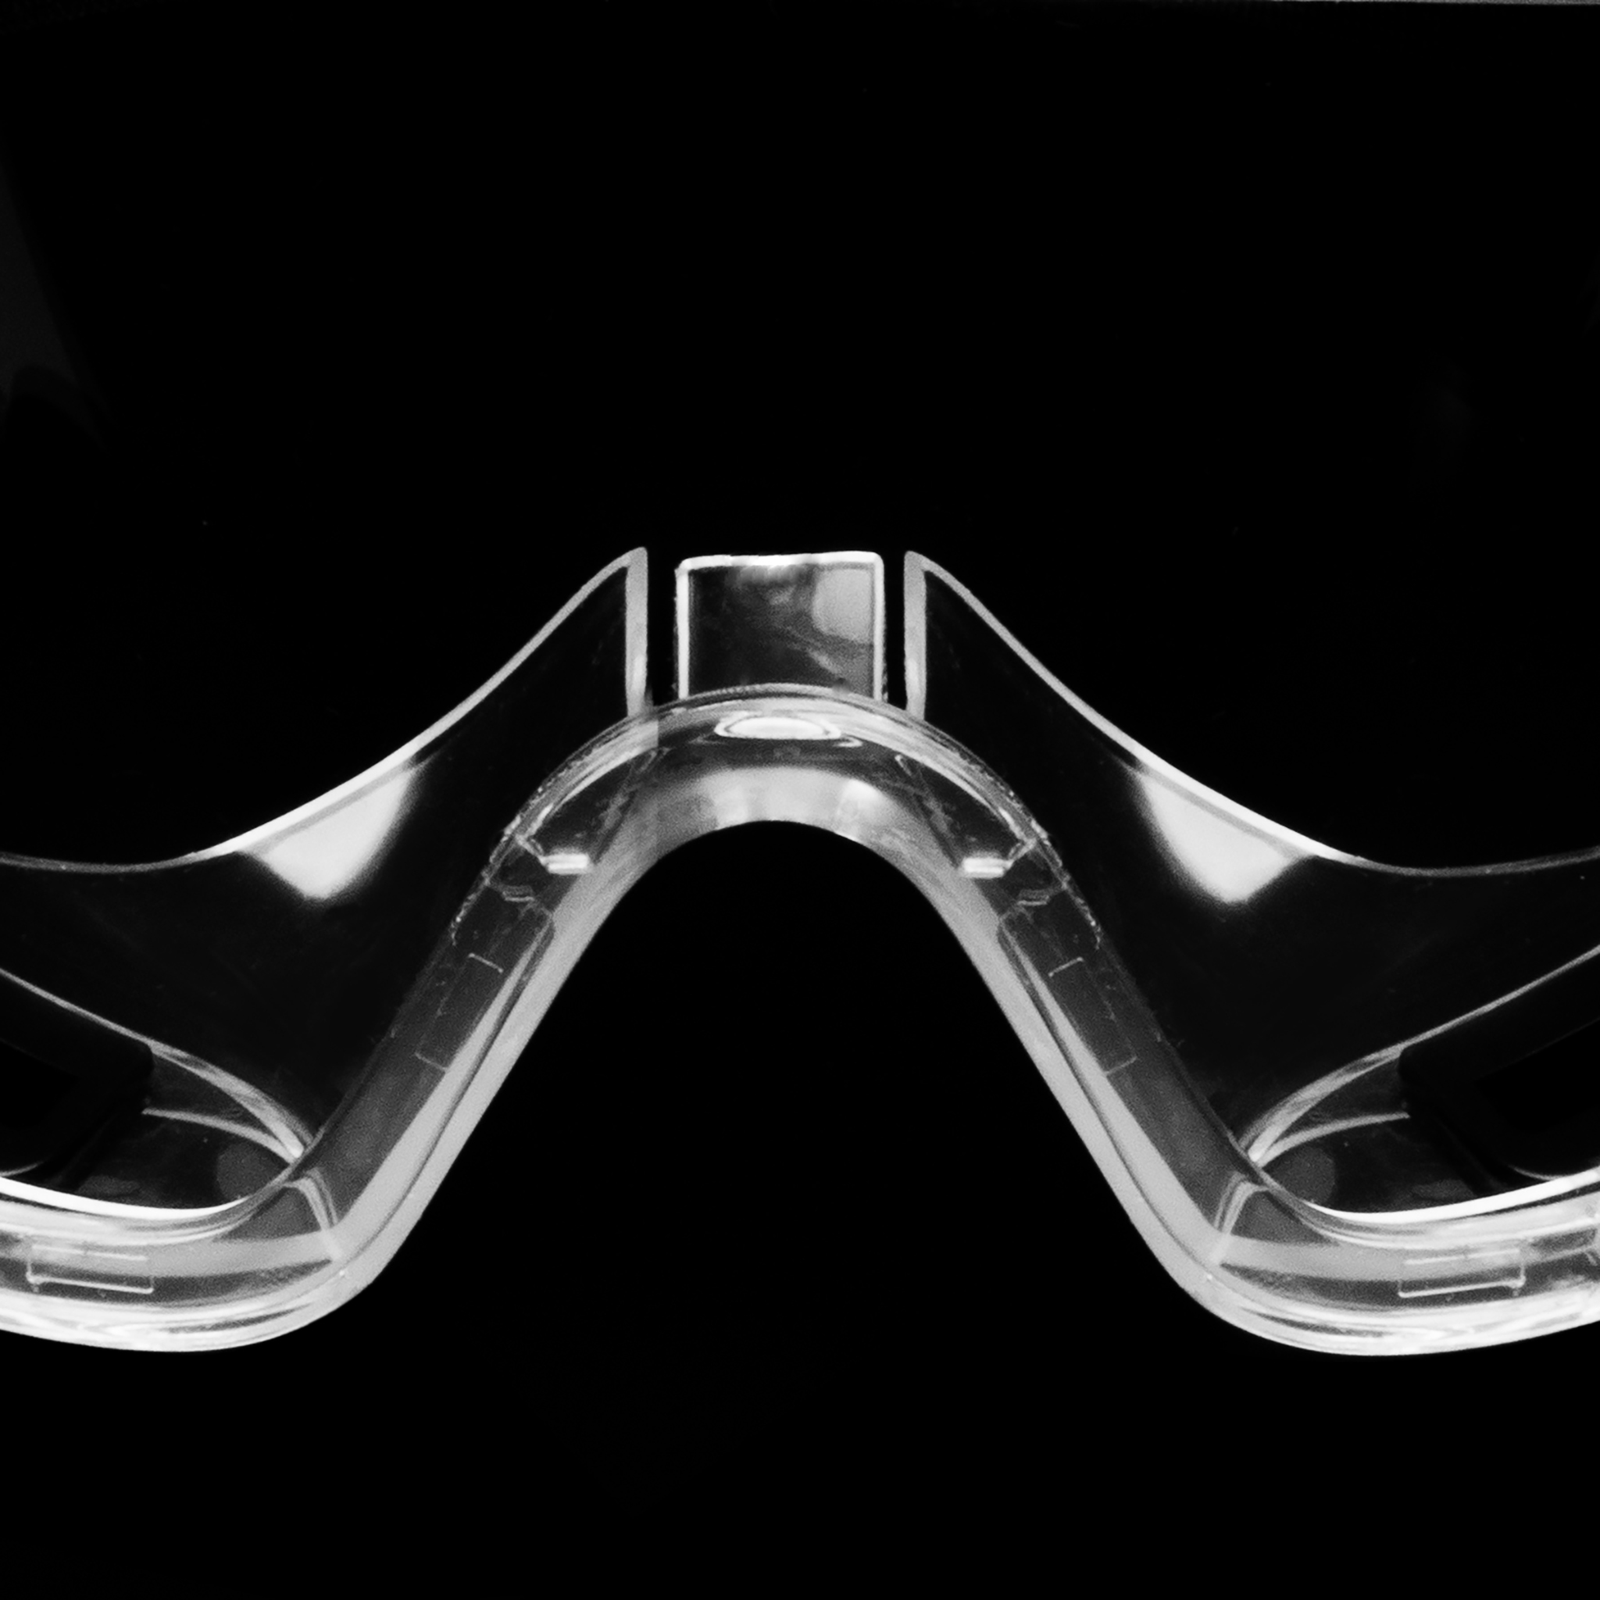 Close up view of the nose bridge of the JORESTECH safety goggle over back background